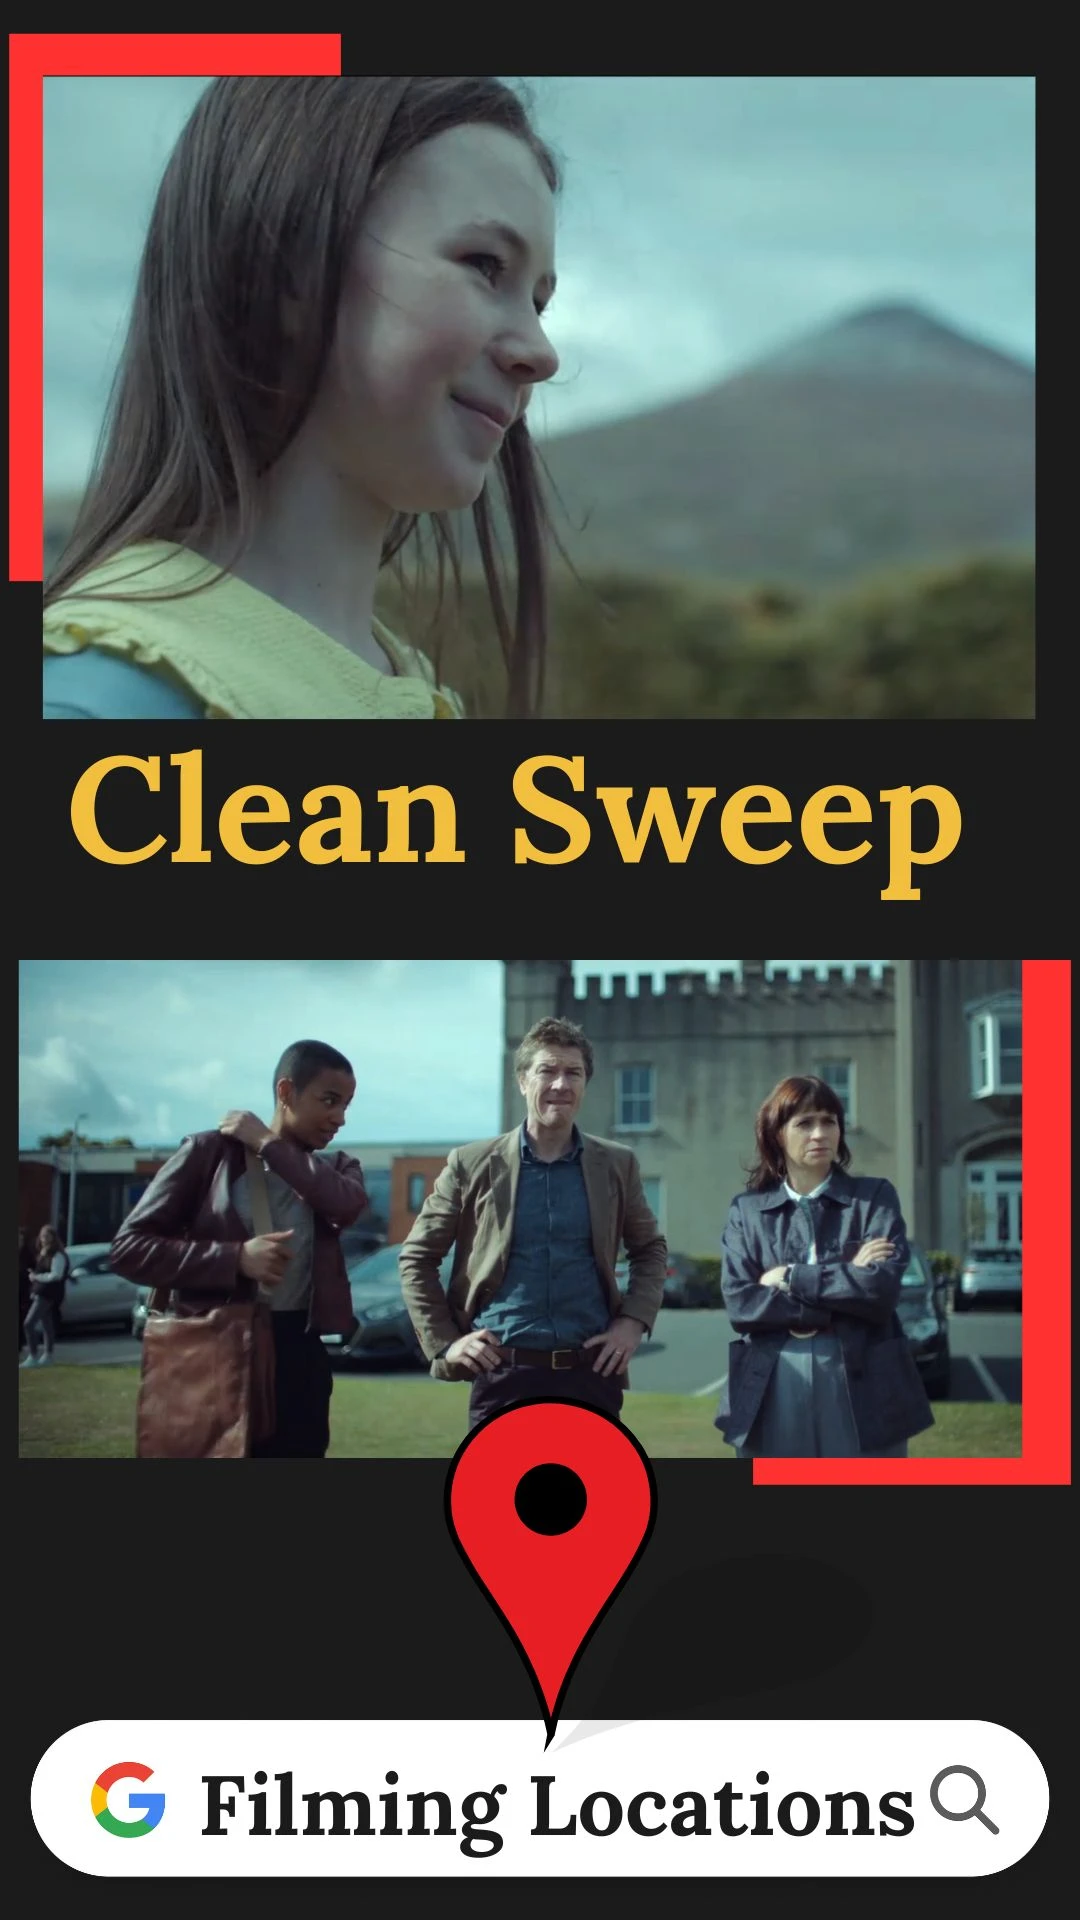 Clean Sweep Filming Locations